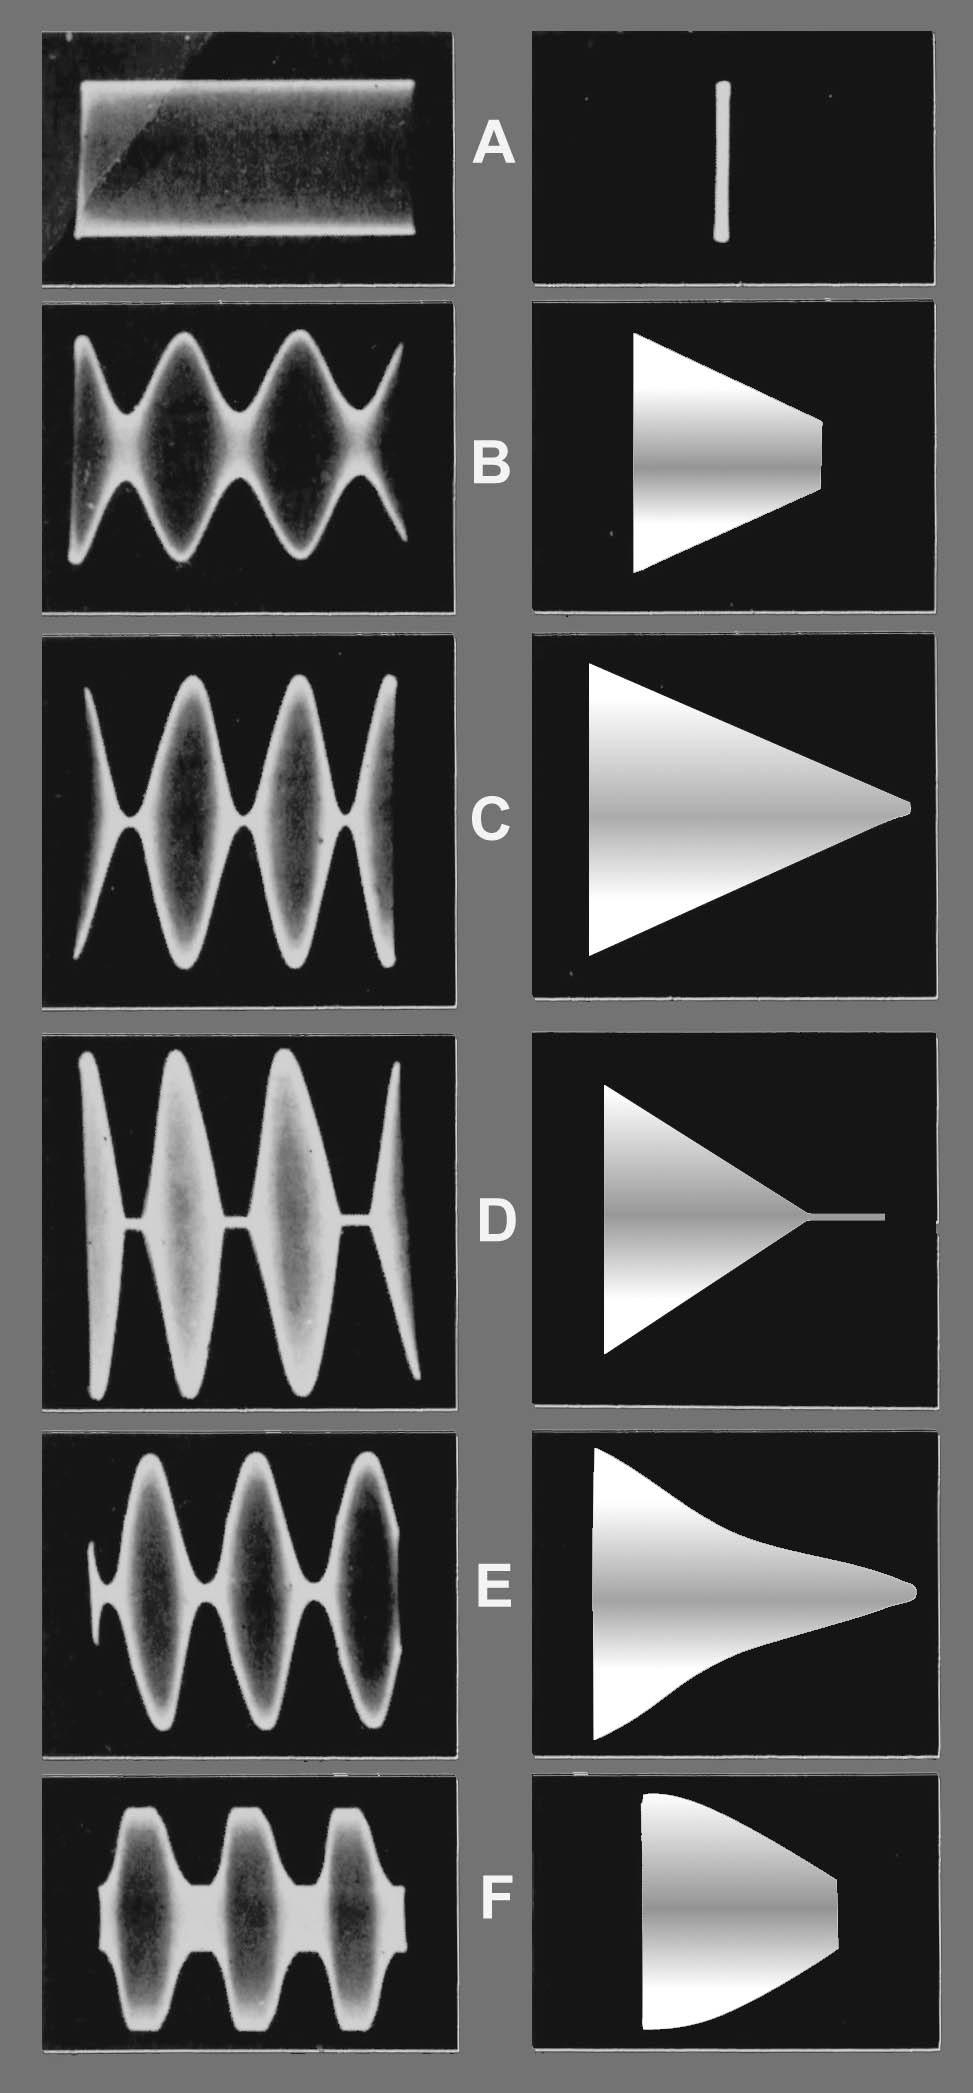 Figure 5. Wave-envelope patterns; with their corresponding trapezoidal patterns.